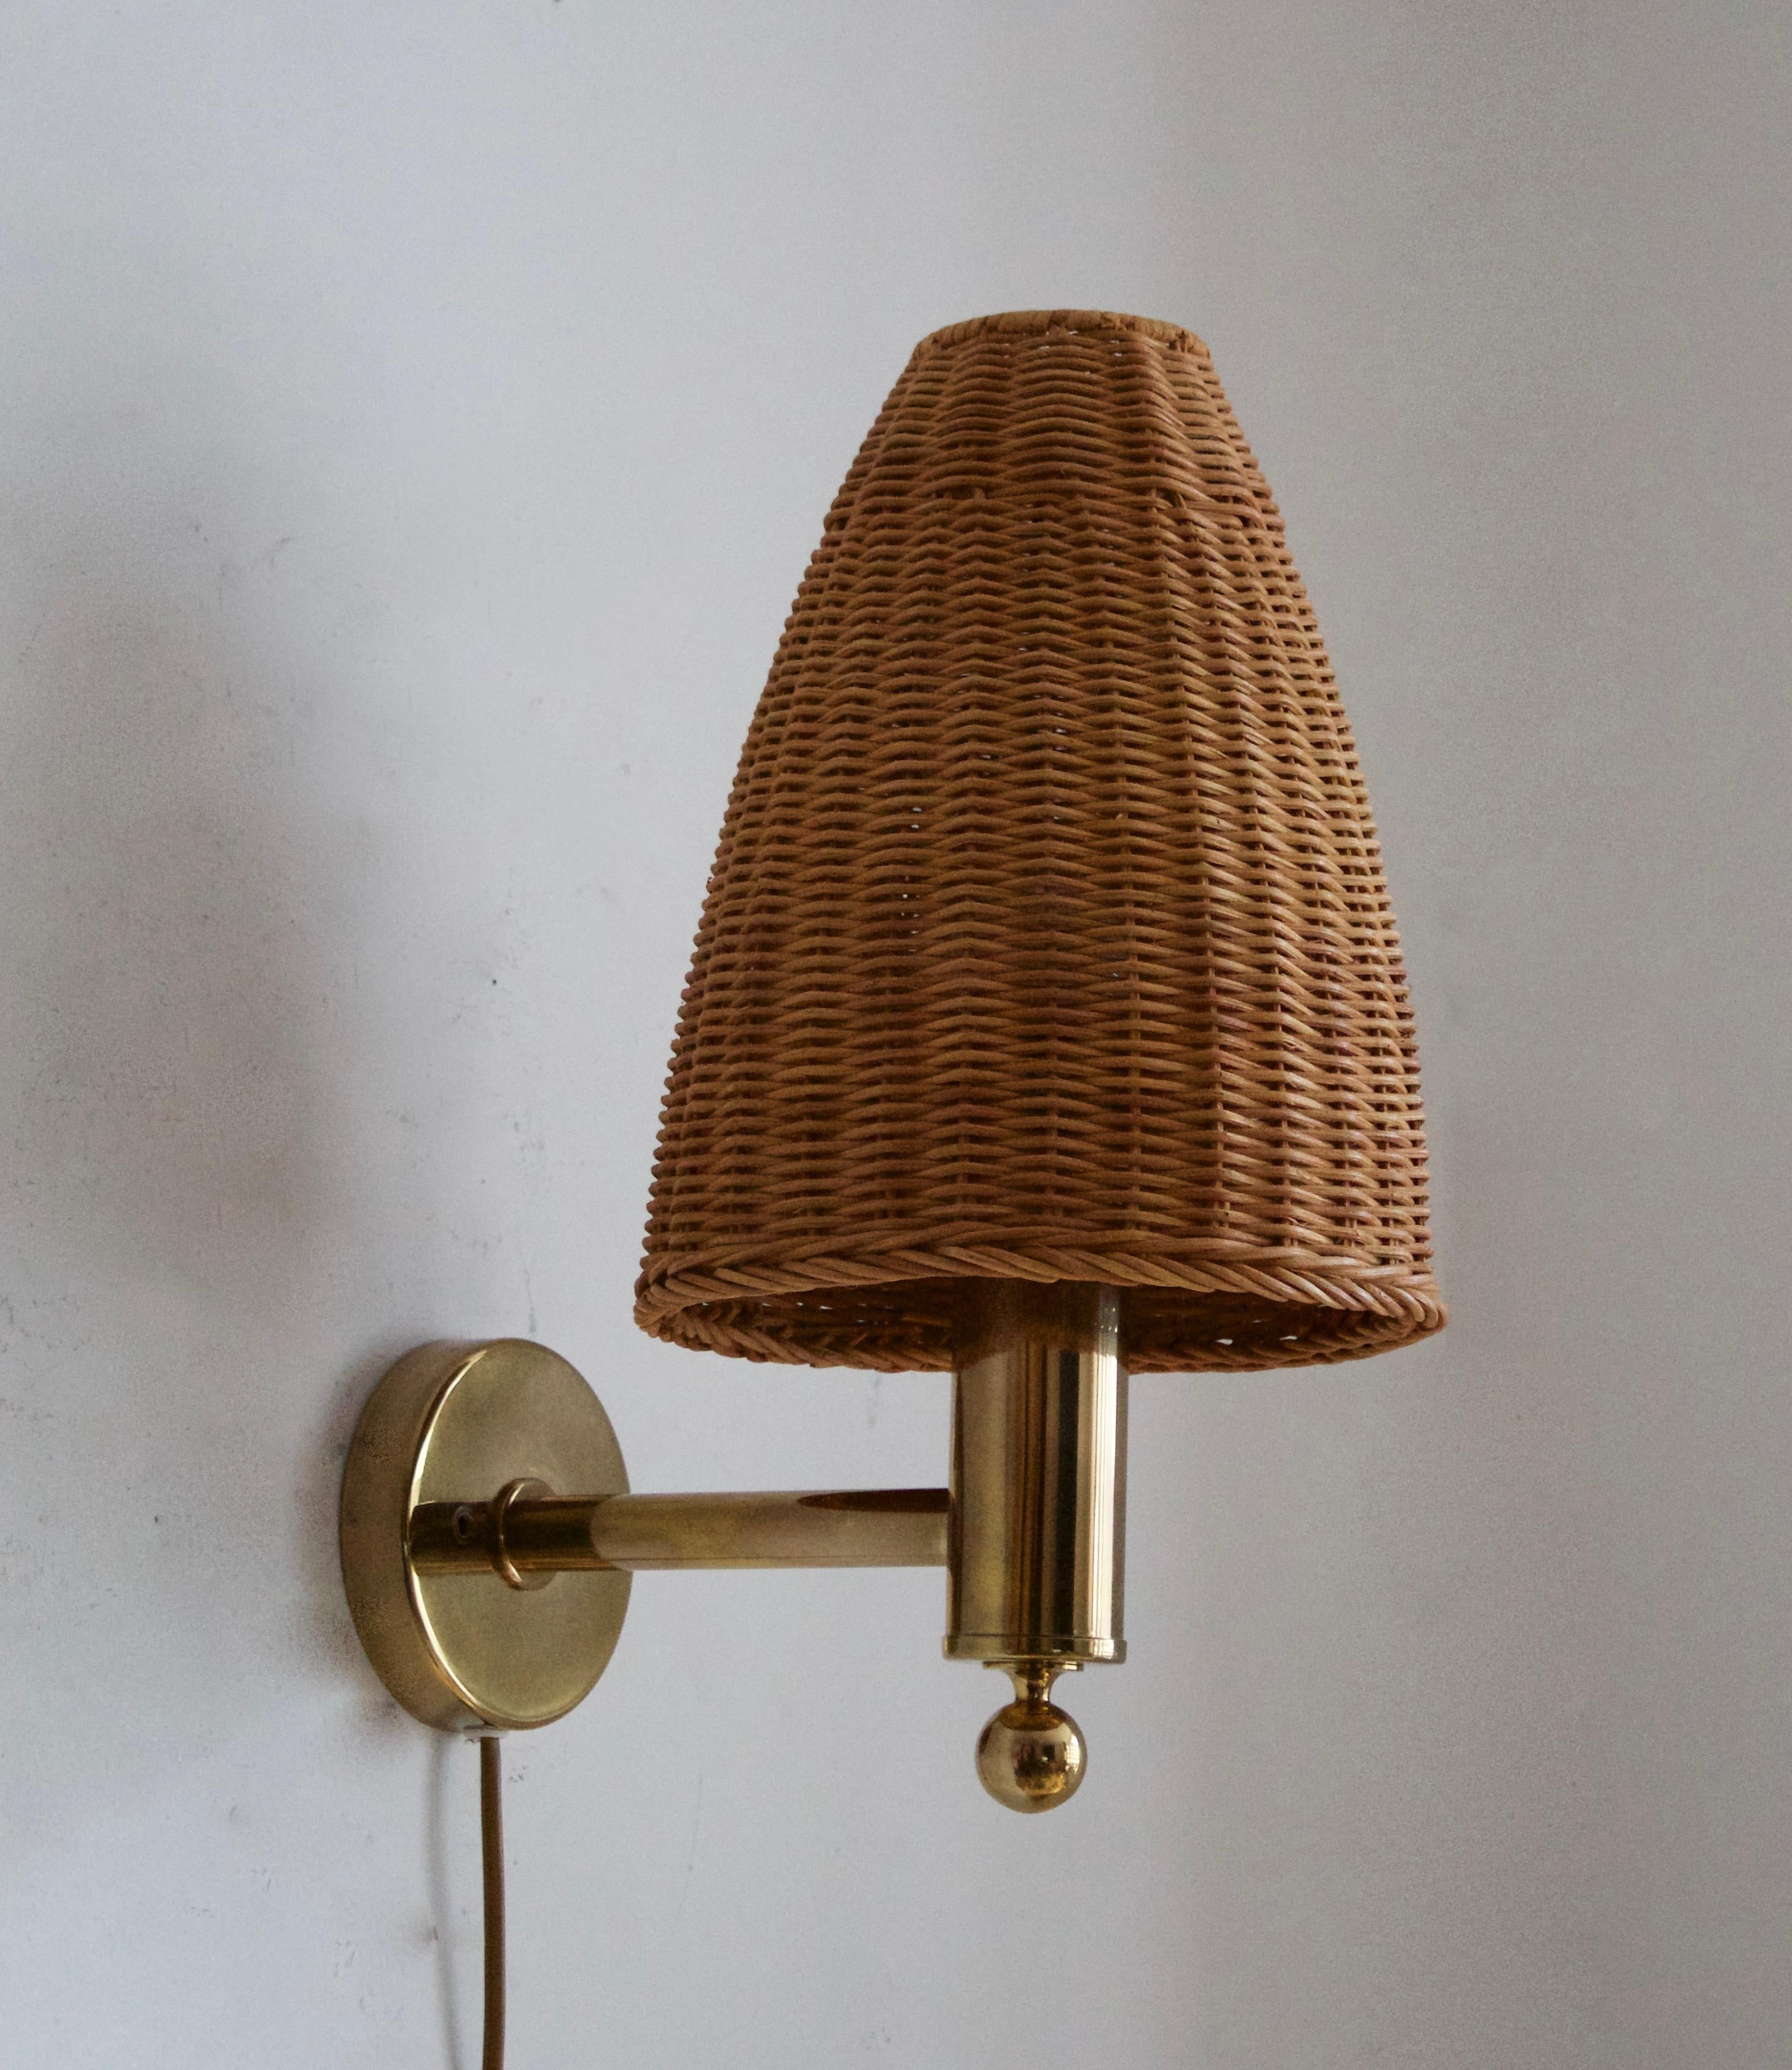 A wall light. Designed and produced by Bergboms, Sweden, circa 1970s. Assorted vintage rattan lampshade.

Other designers of the period include Paavo Tynell, Hans Bergström, Josef Frank, and Kaare Klint.